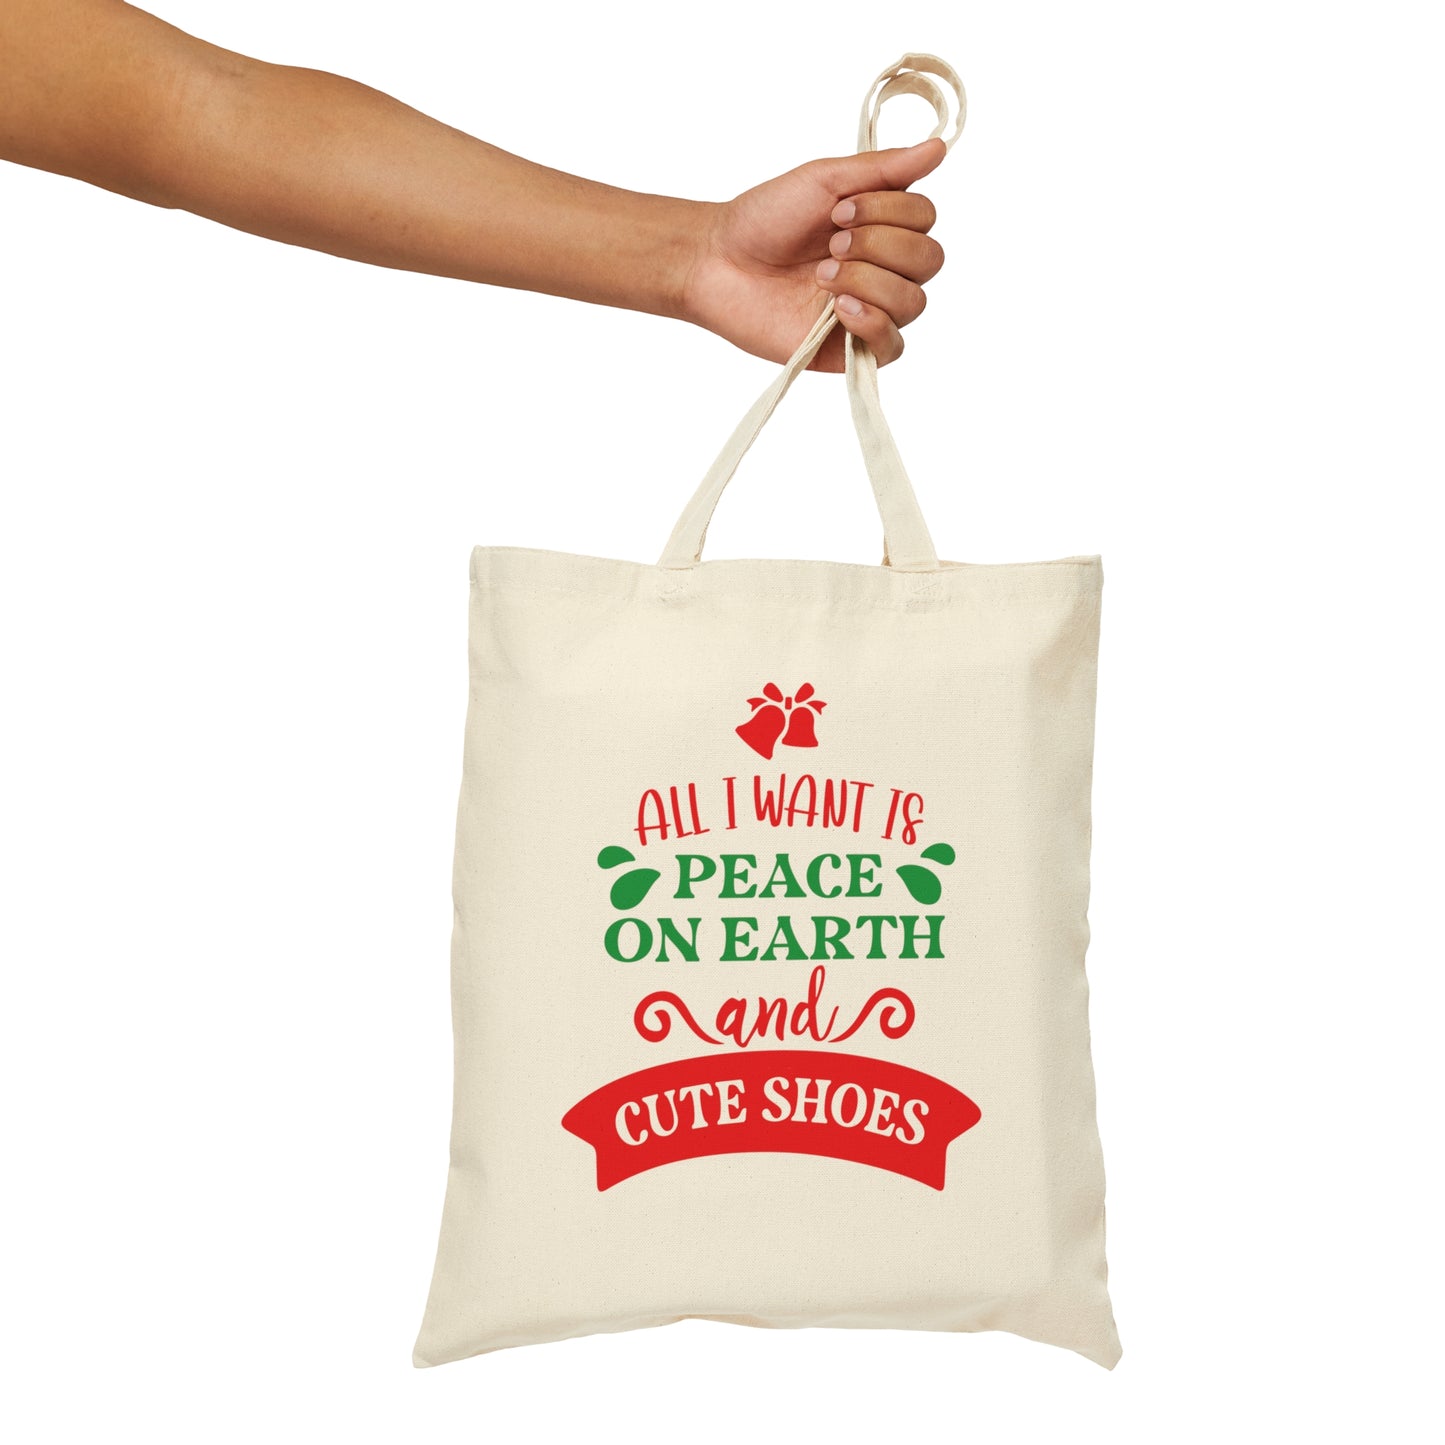 All I Want Is Peace on Earth And Cute Shoes Funny Fashion Jokes Canvas Shopping Cotton Tote Bag